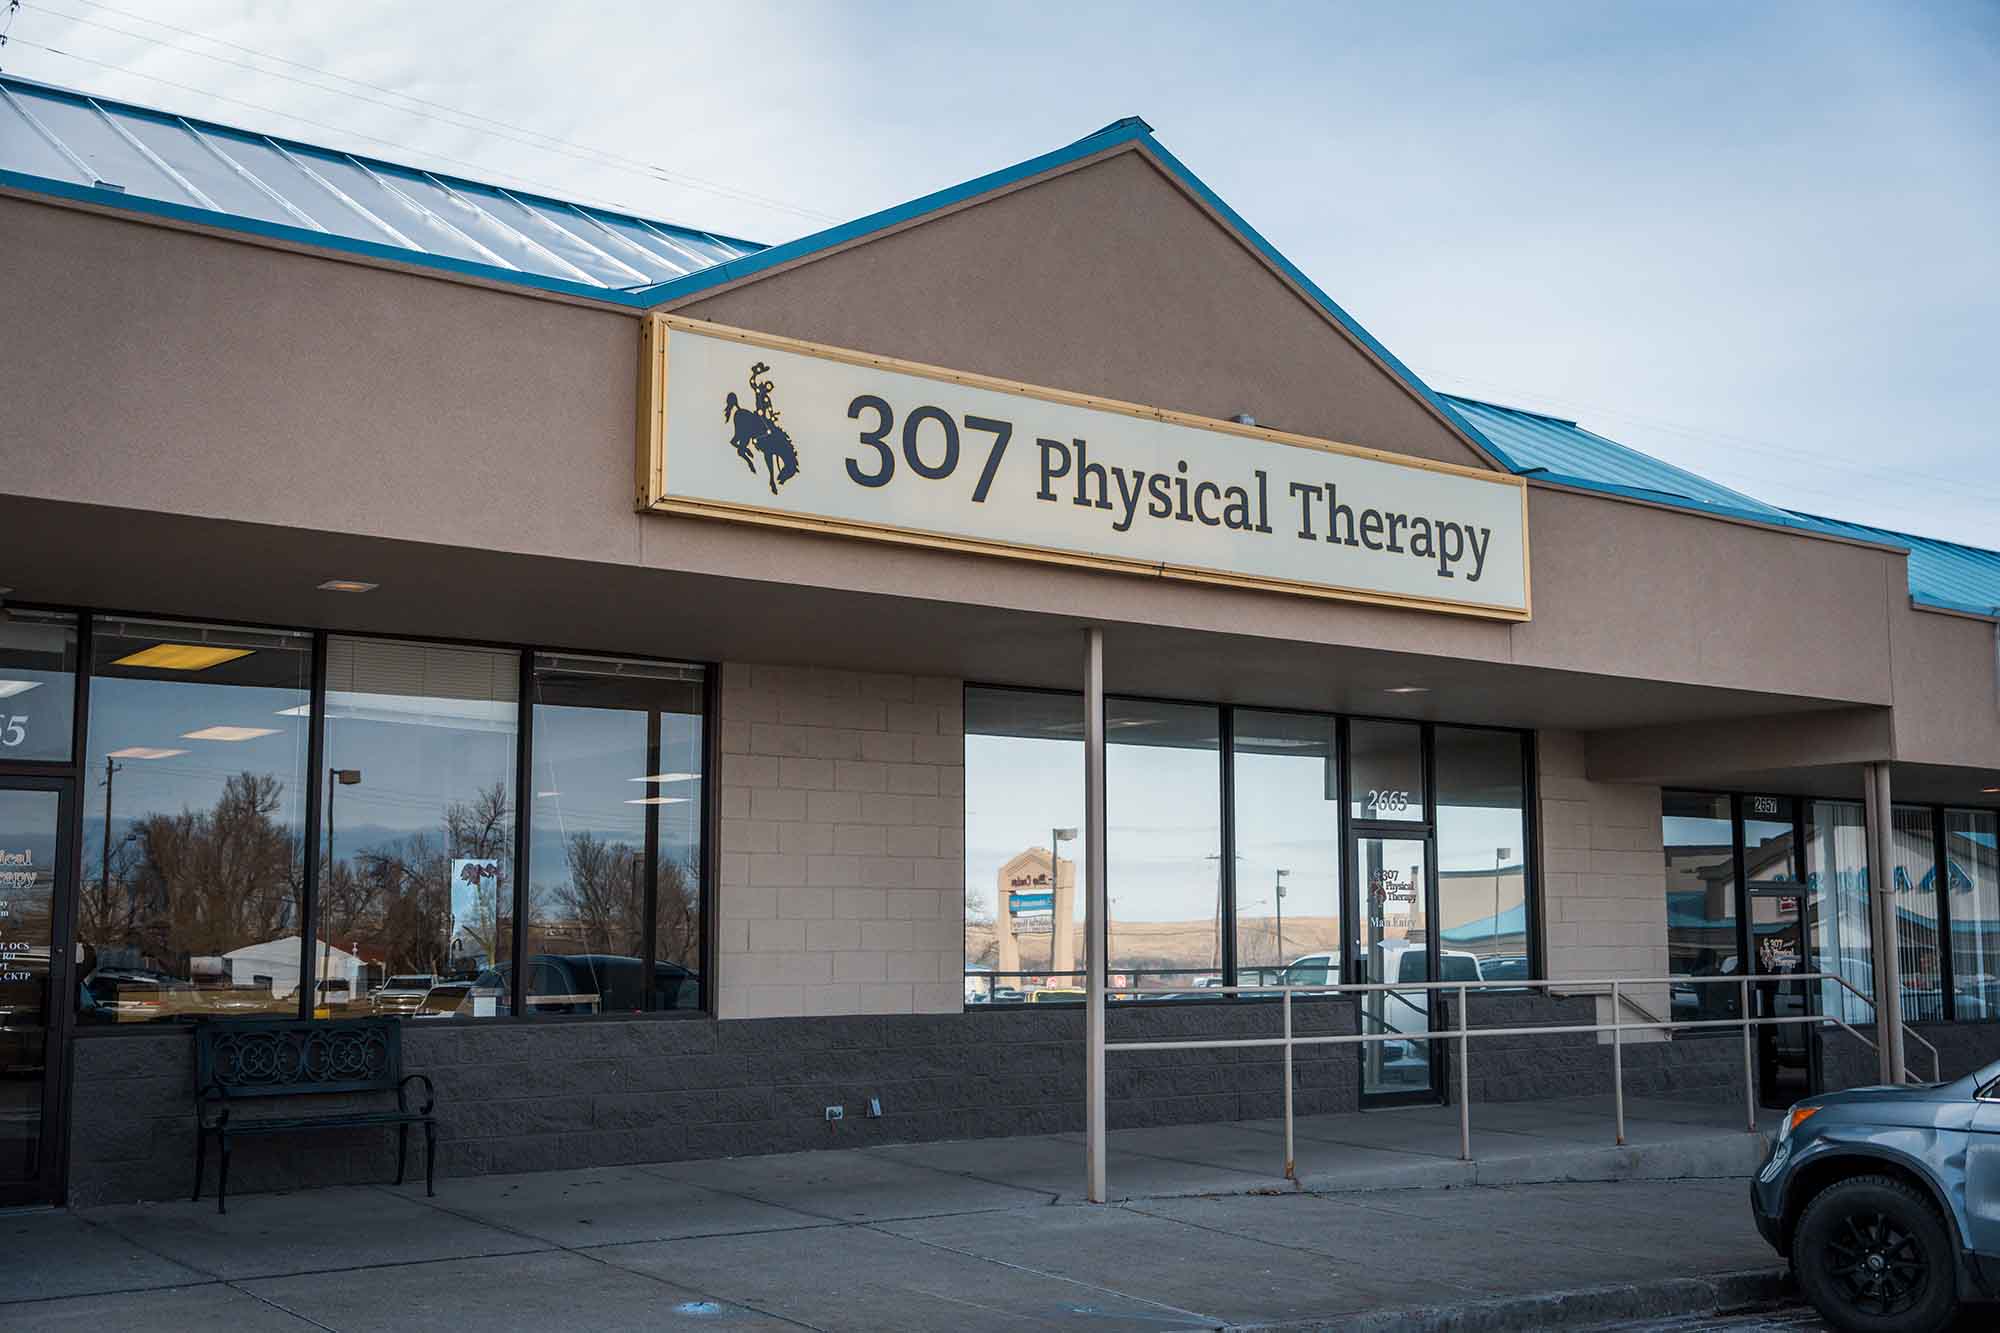 307 Physical Therapy